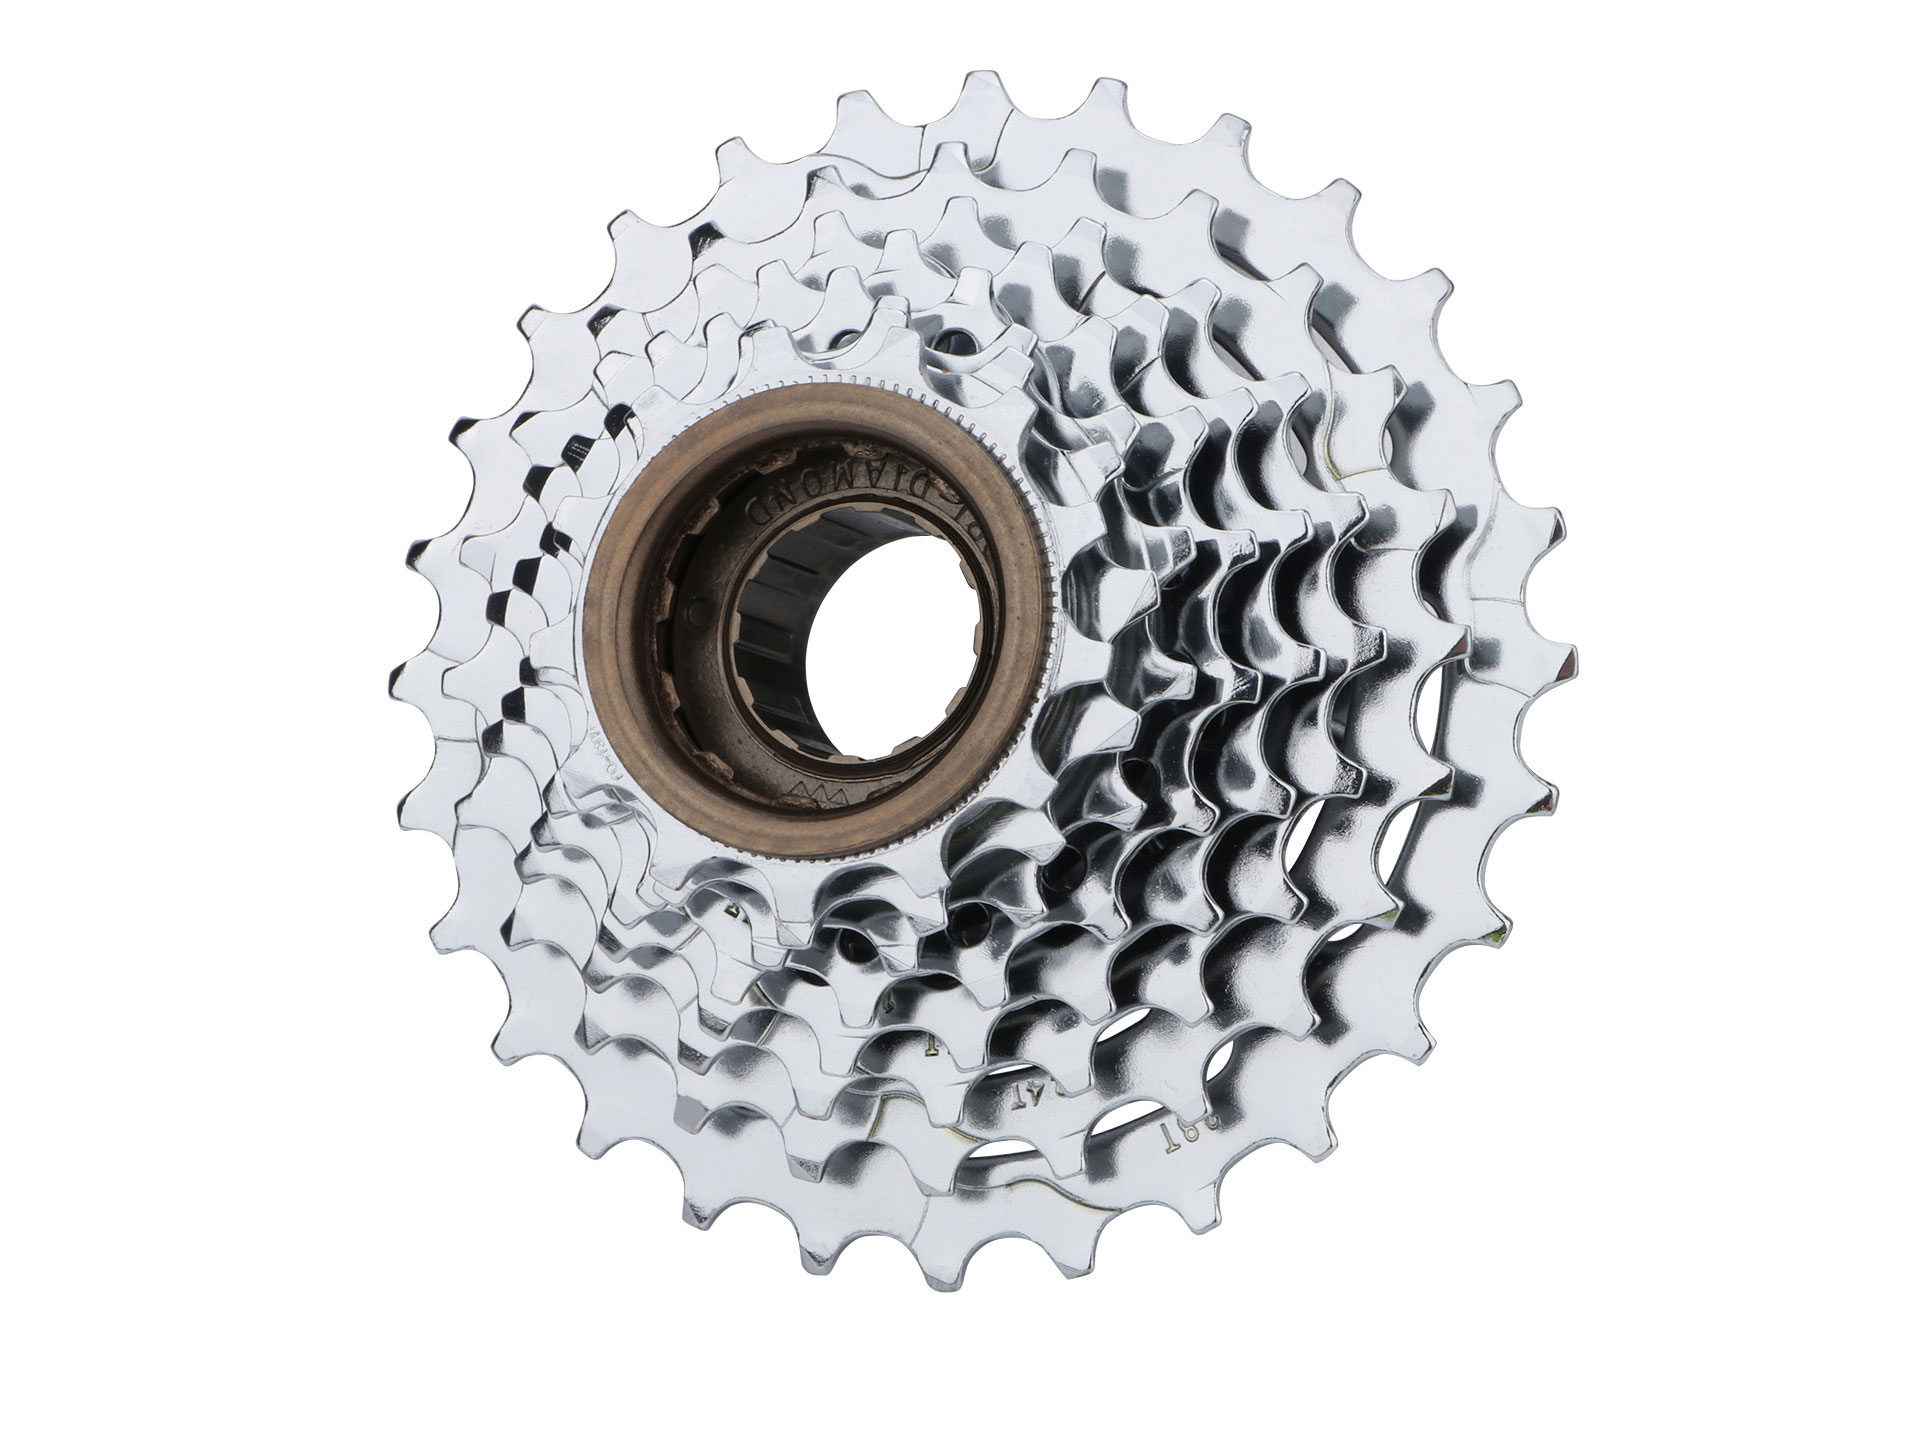 Cassettes  Components, Asia Bicycle 亞洲單車